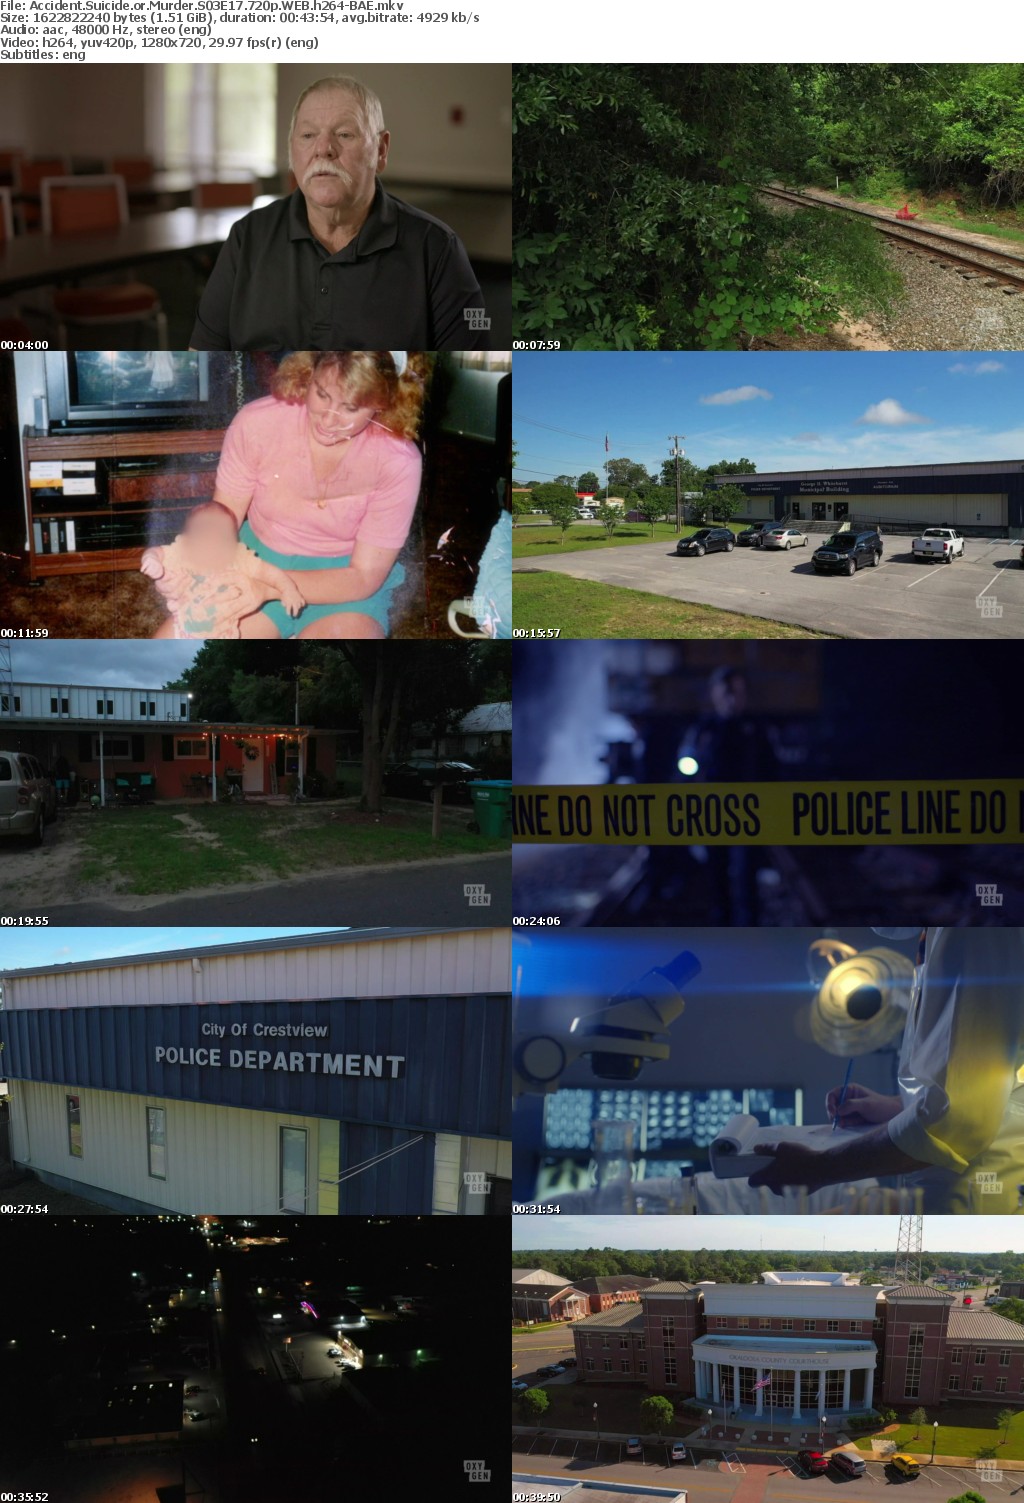 Accident Suicide or Murder S03E17 720p WEB h264-BAE